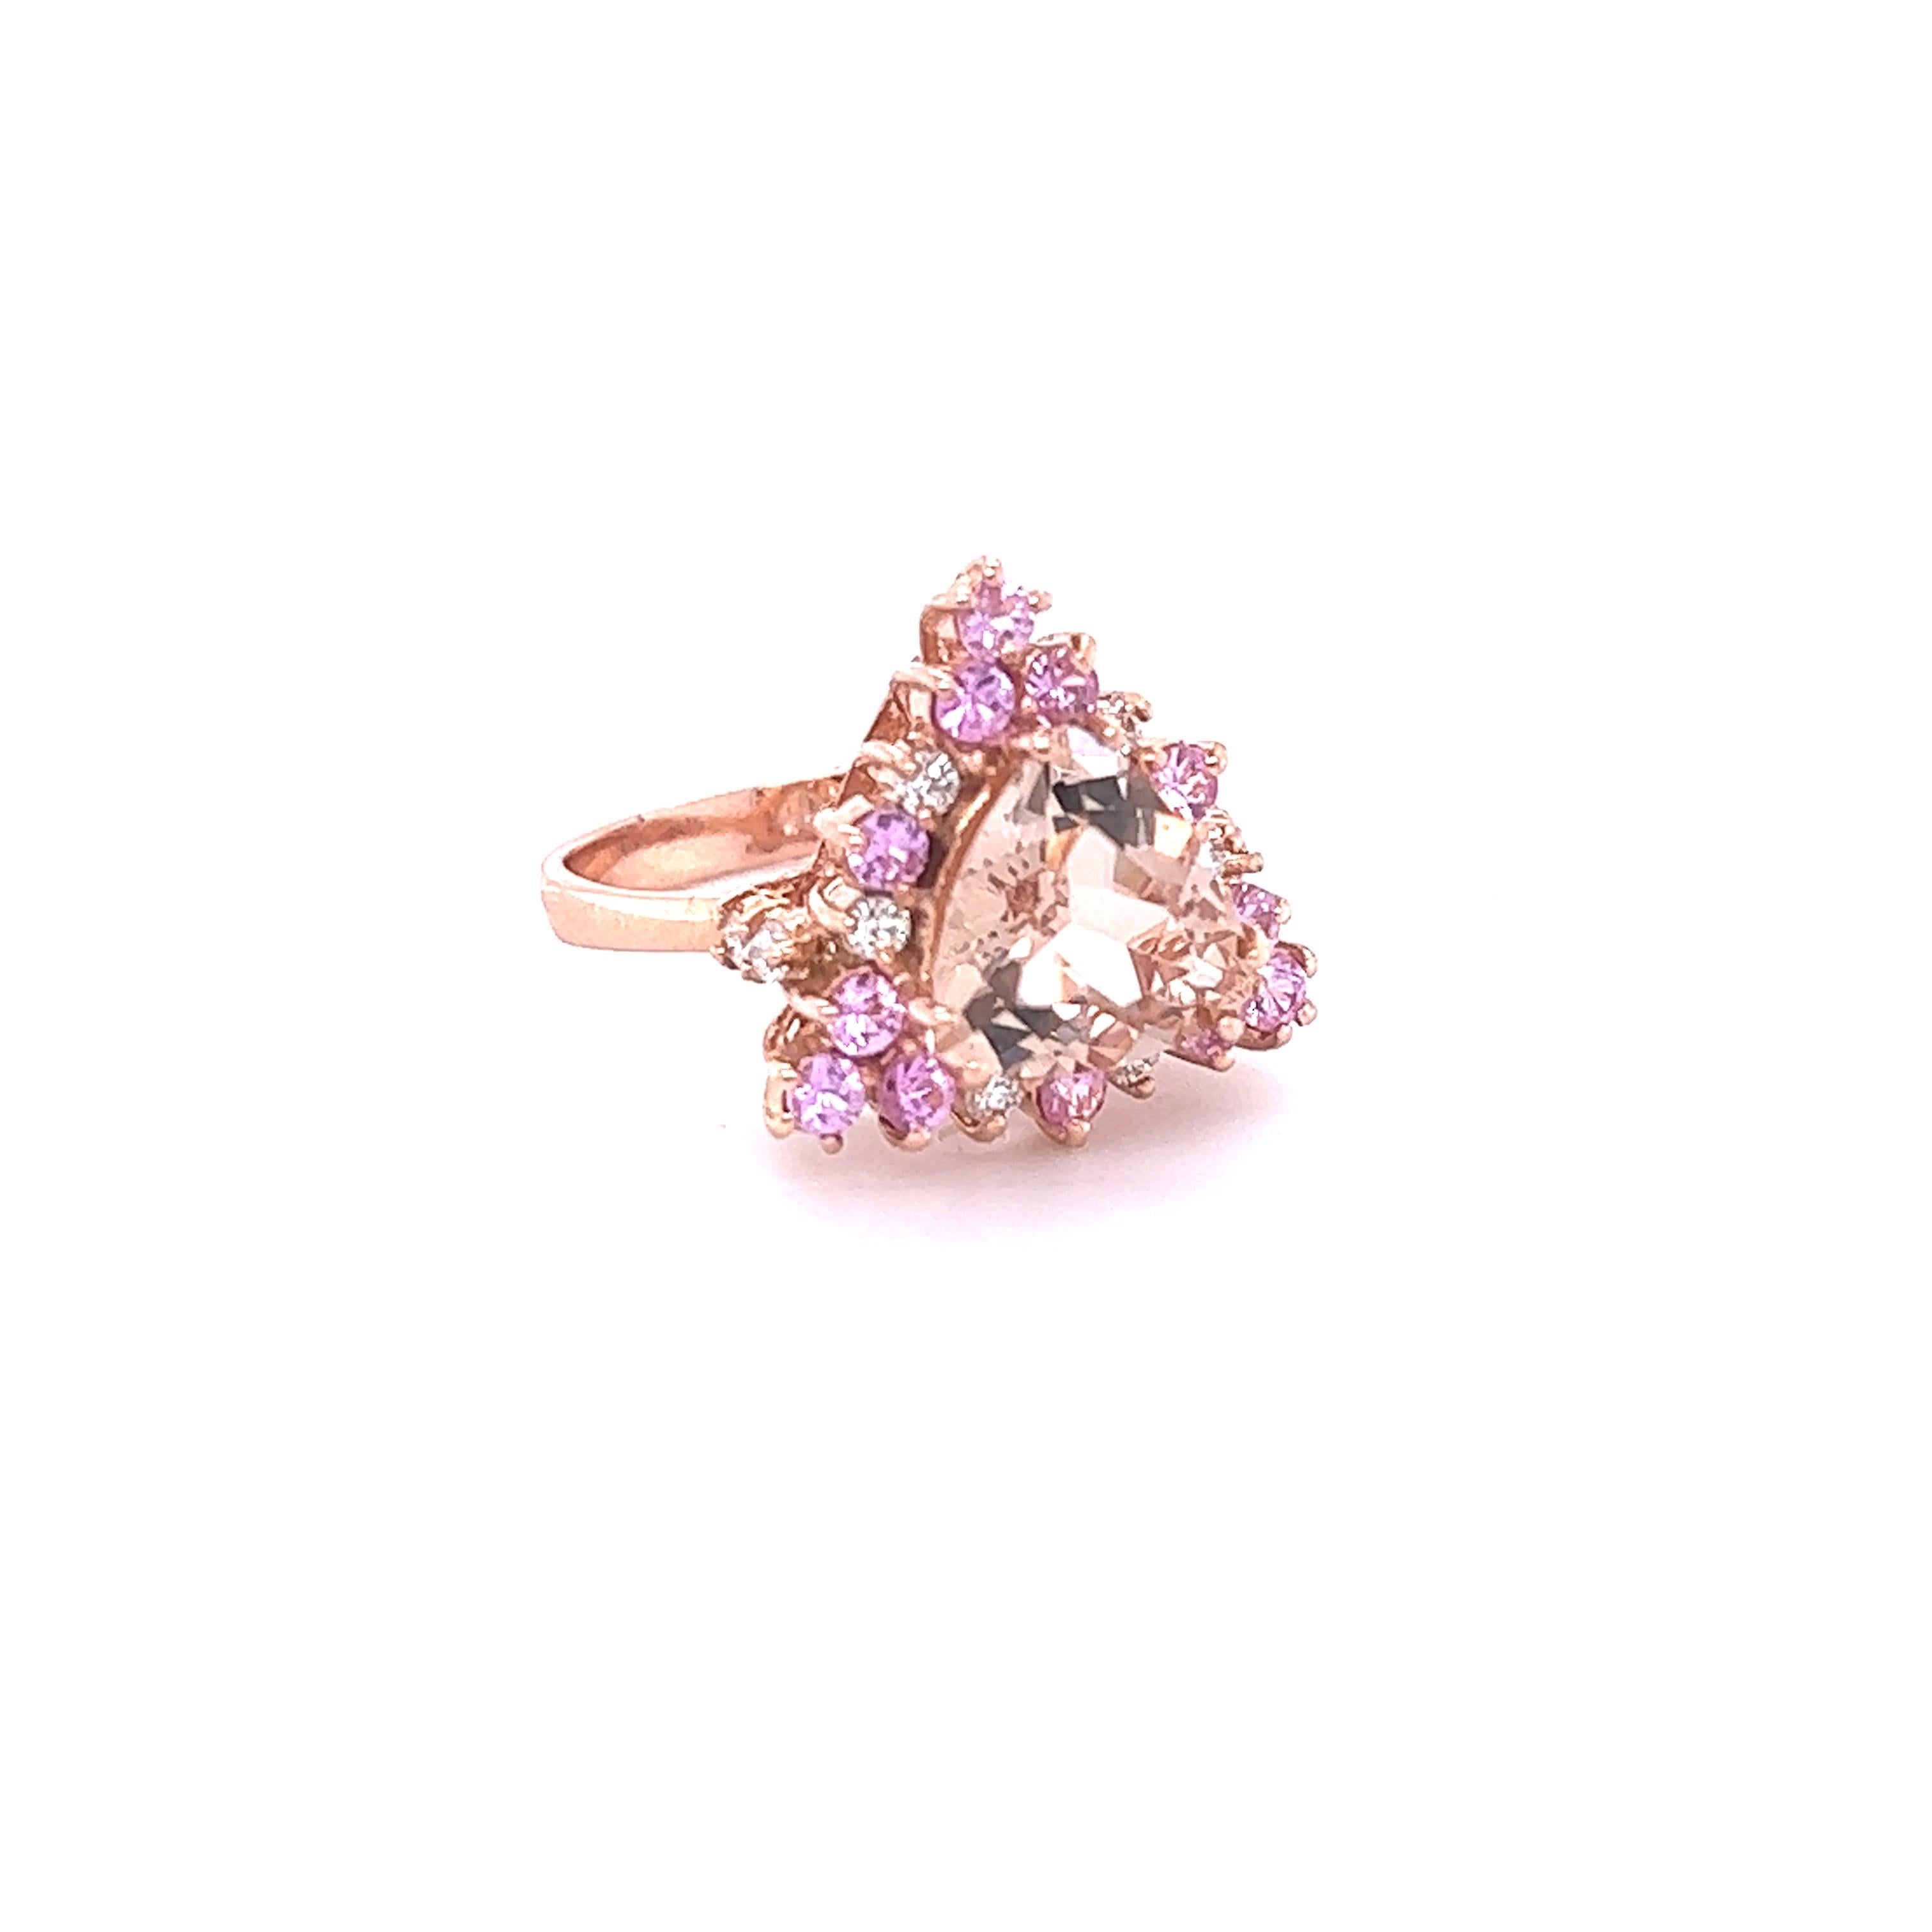 
This Morganite Diamond Ring has a 2.73 Carat Trillion Cut Peach Morganite and is surrounded by 12 Pink Sapphires that weigh 0.71 carats and 10 Round Cut Diamonds that weigh 0.26 carats (Clarity: VS, Color: H) The Total Carat Weight of the ring is